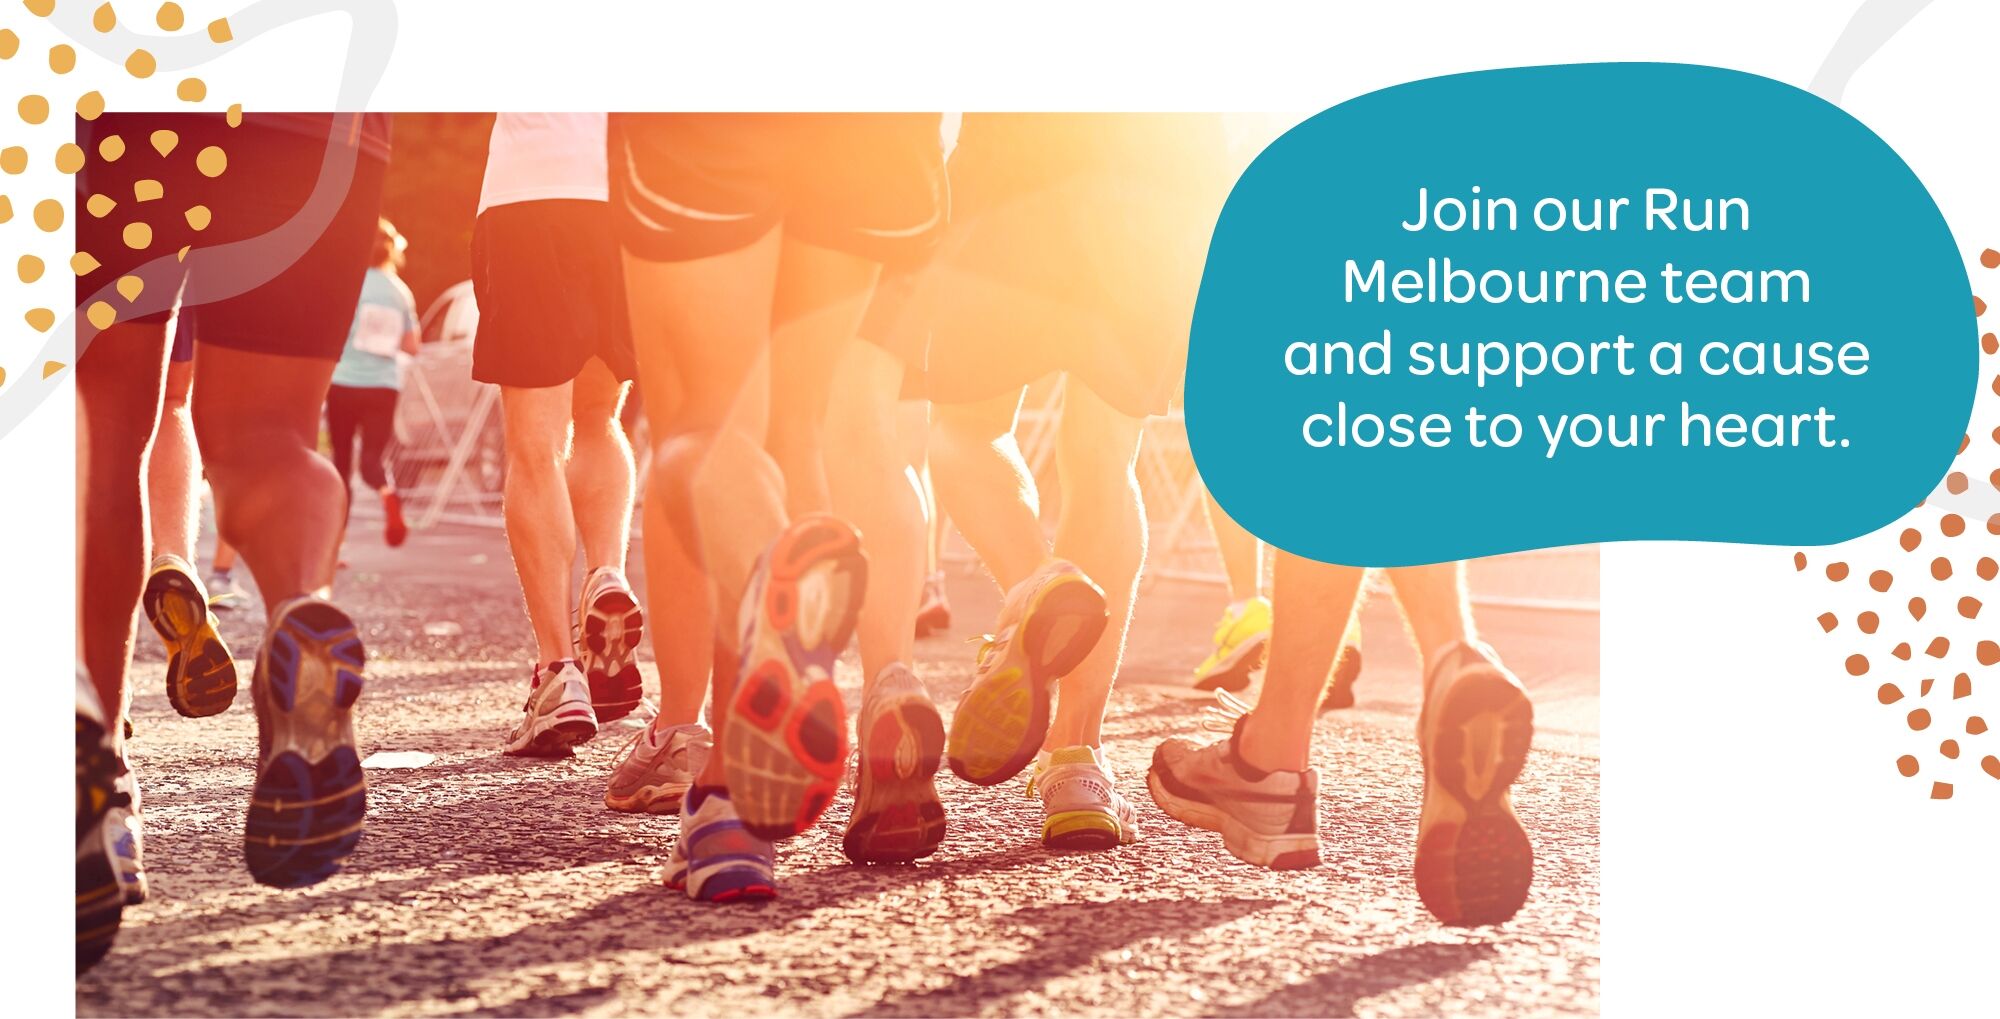 join our run melbourne team and support a cause close to your heart